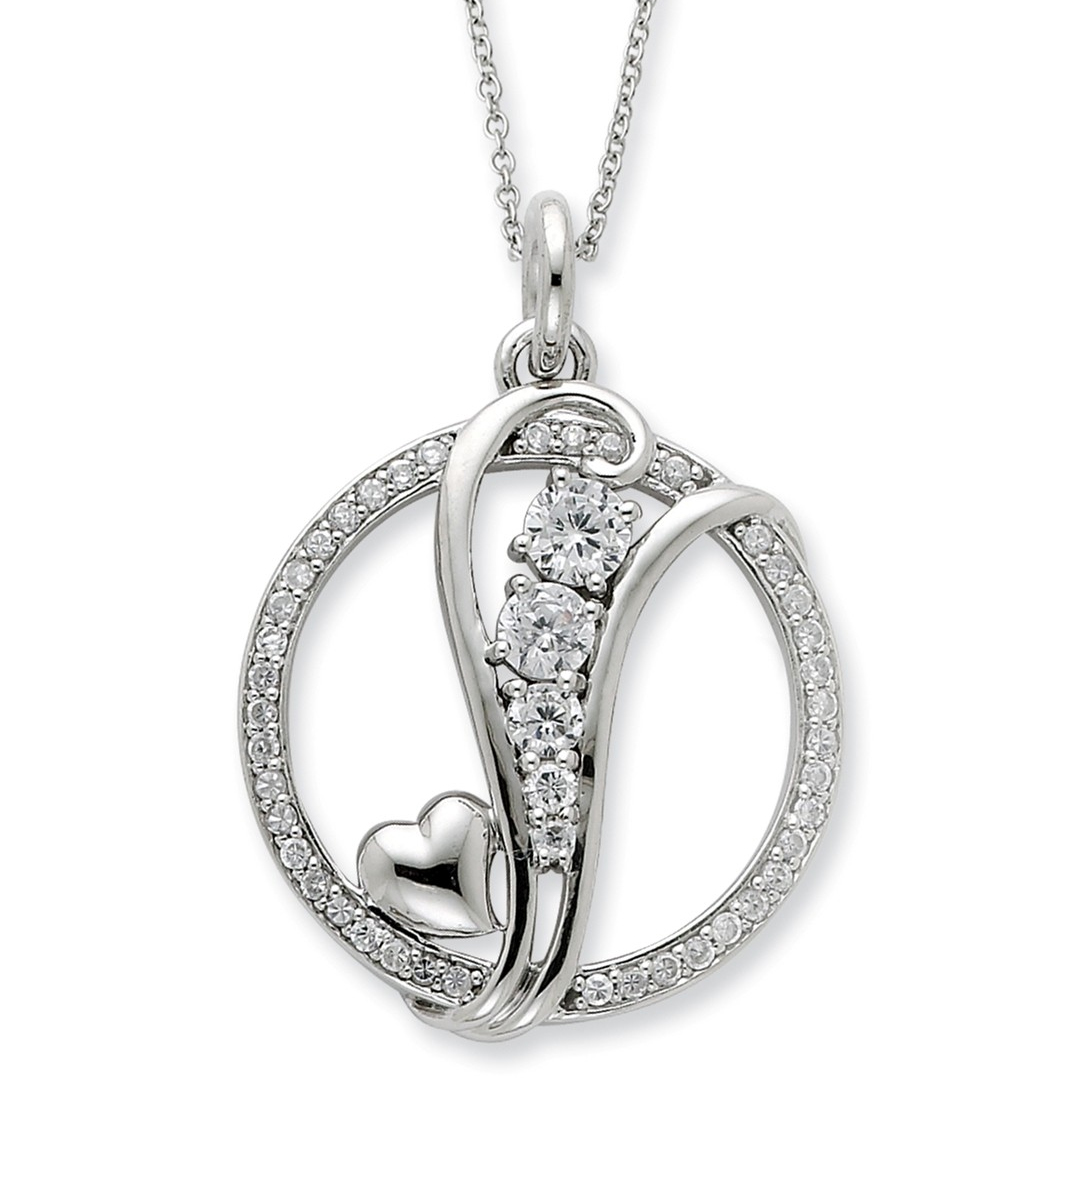 'Journey of Promise' CZ Pendant Necklace, Rhodium-Plated Sterling Silver, 18